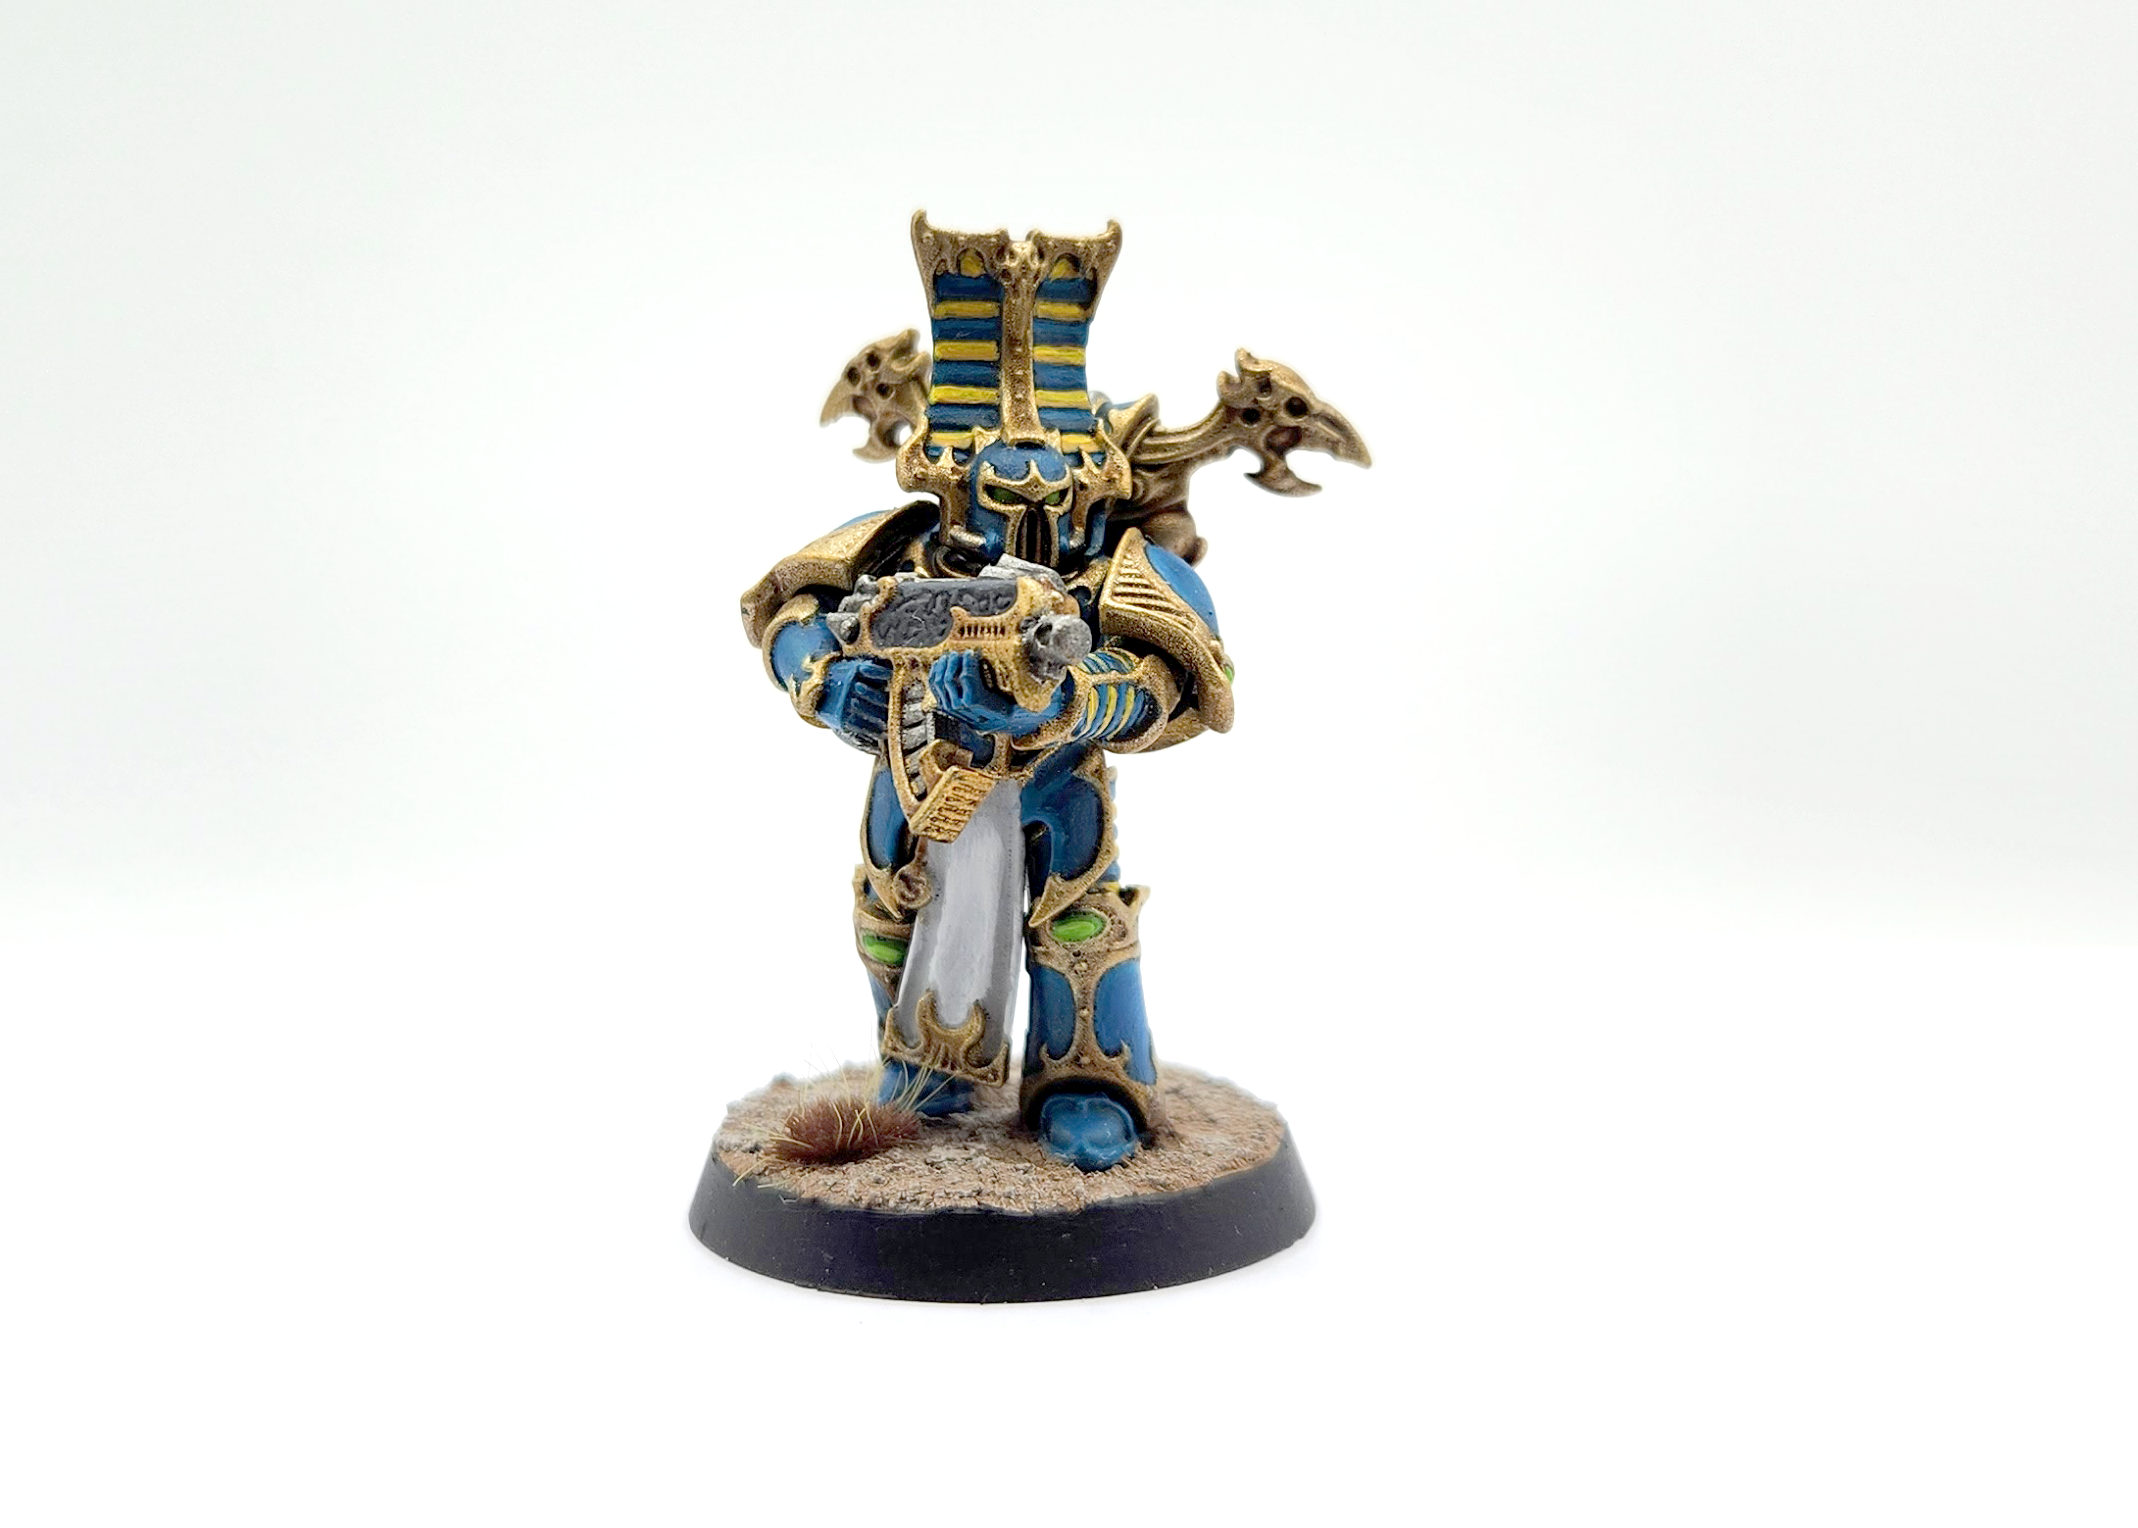 Simple painting can be effective for Thousand Sons • Chest of Colors